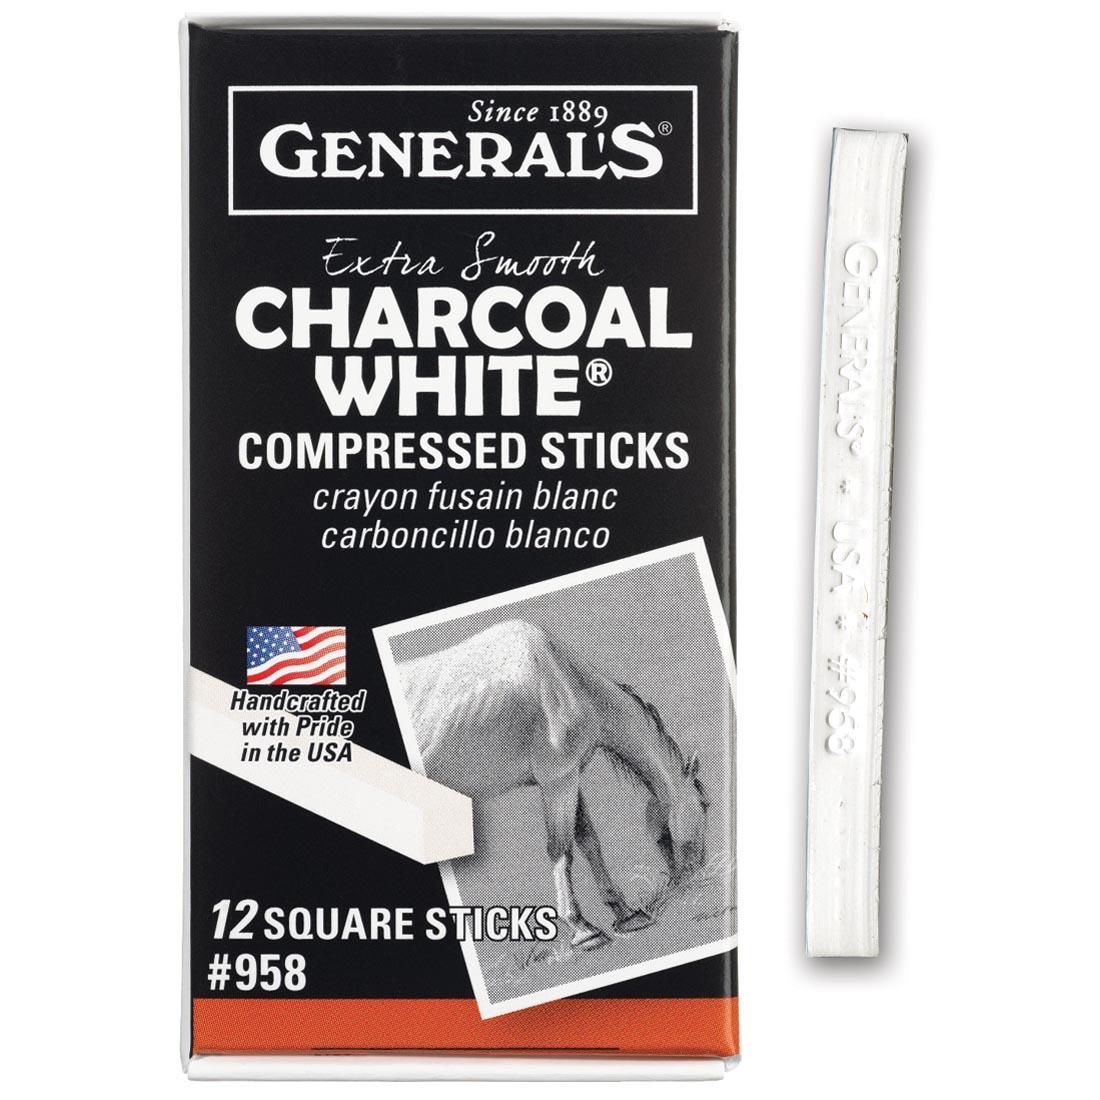 General's Charcoal White Compressed Sticks